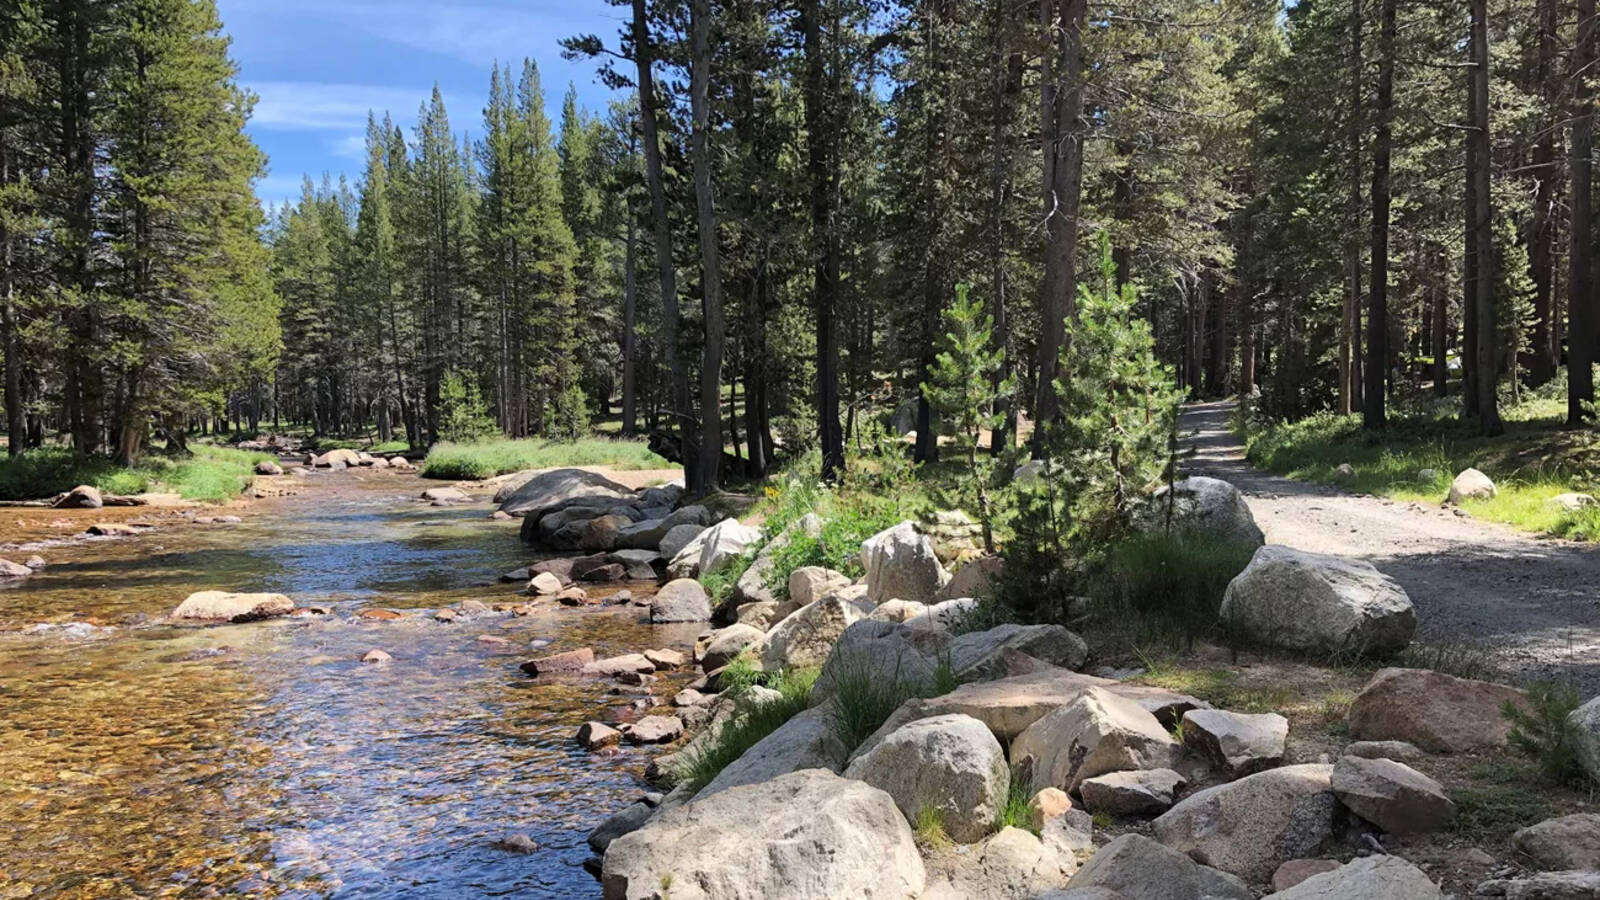 <p>Restoration and modernization of the Tuolumne Meadows campground in Yosemite National Park. This major project will upgrade campground facilities and utility systems. It will also convert a campground road to a hiking trail to better protect the adjacent Tuolumne Wild and Scenic River. </p>